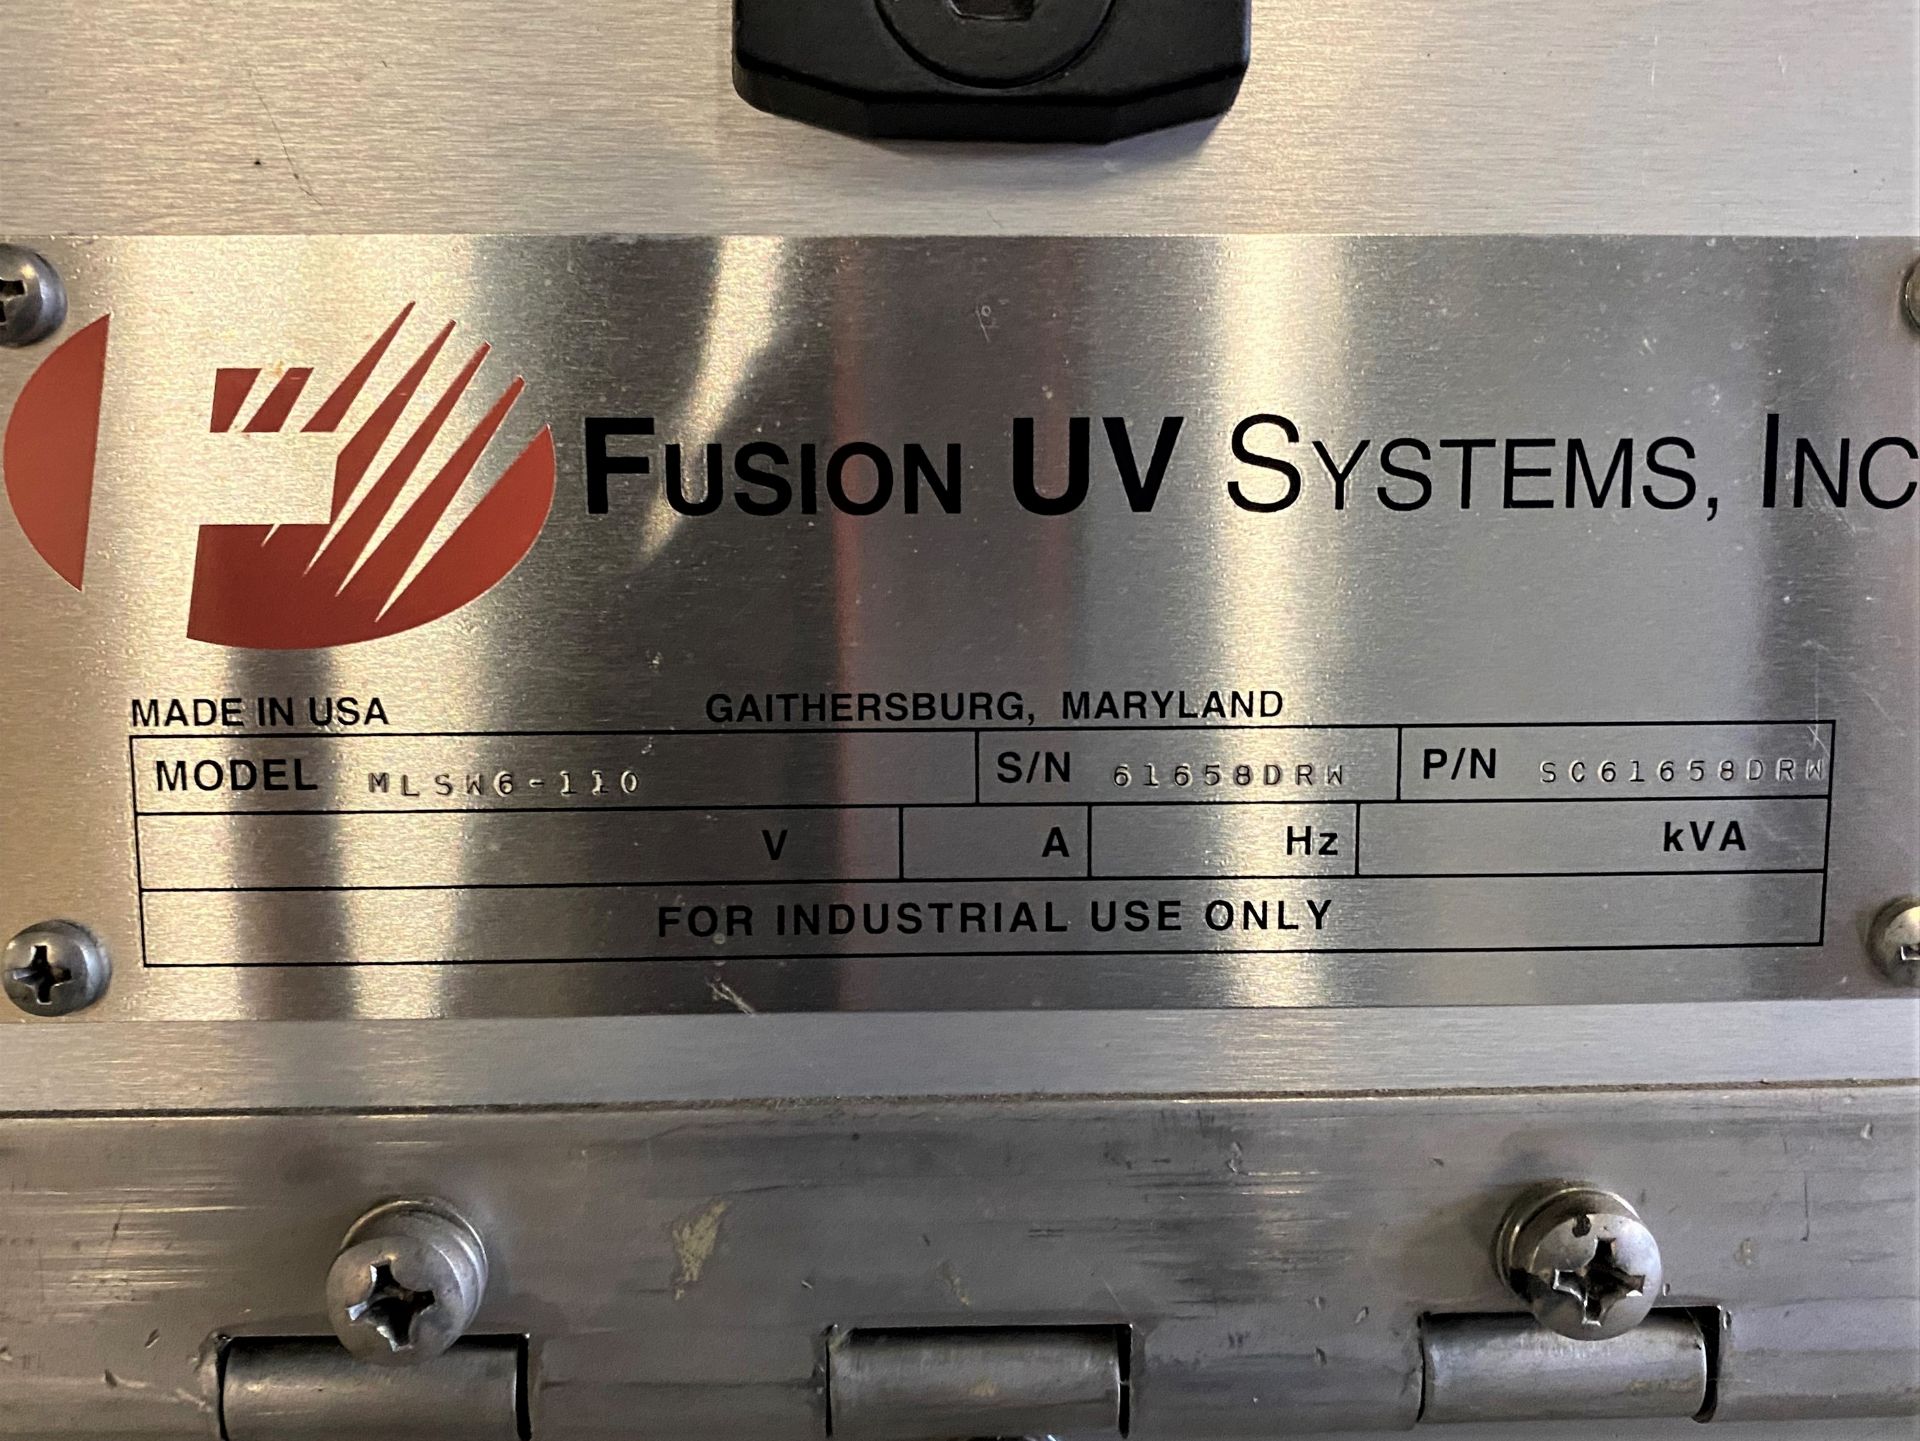 Fusion UV Systems Mdl. MLSW6-110 with Reels - Image 2 of 2